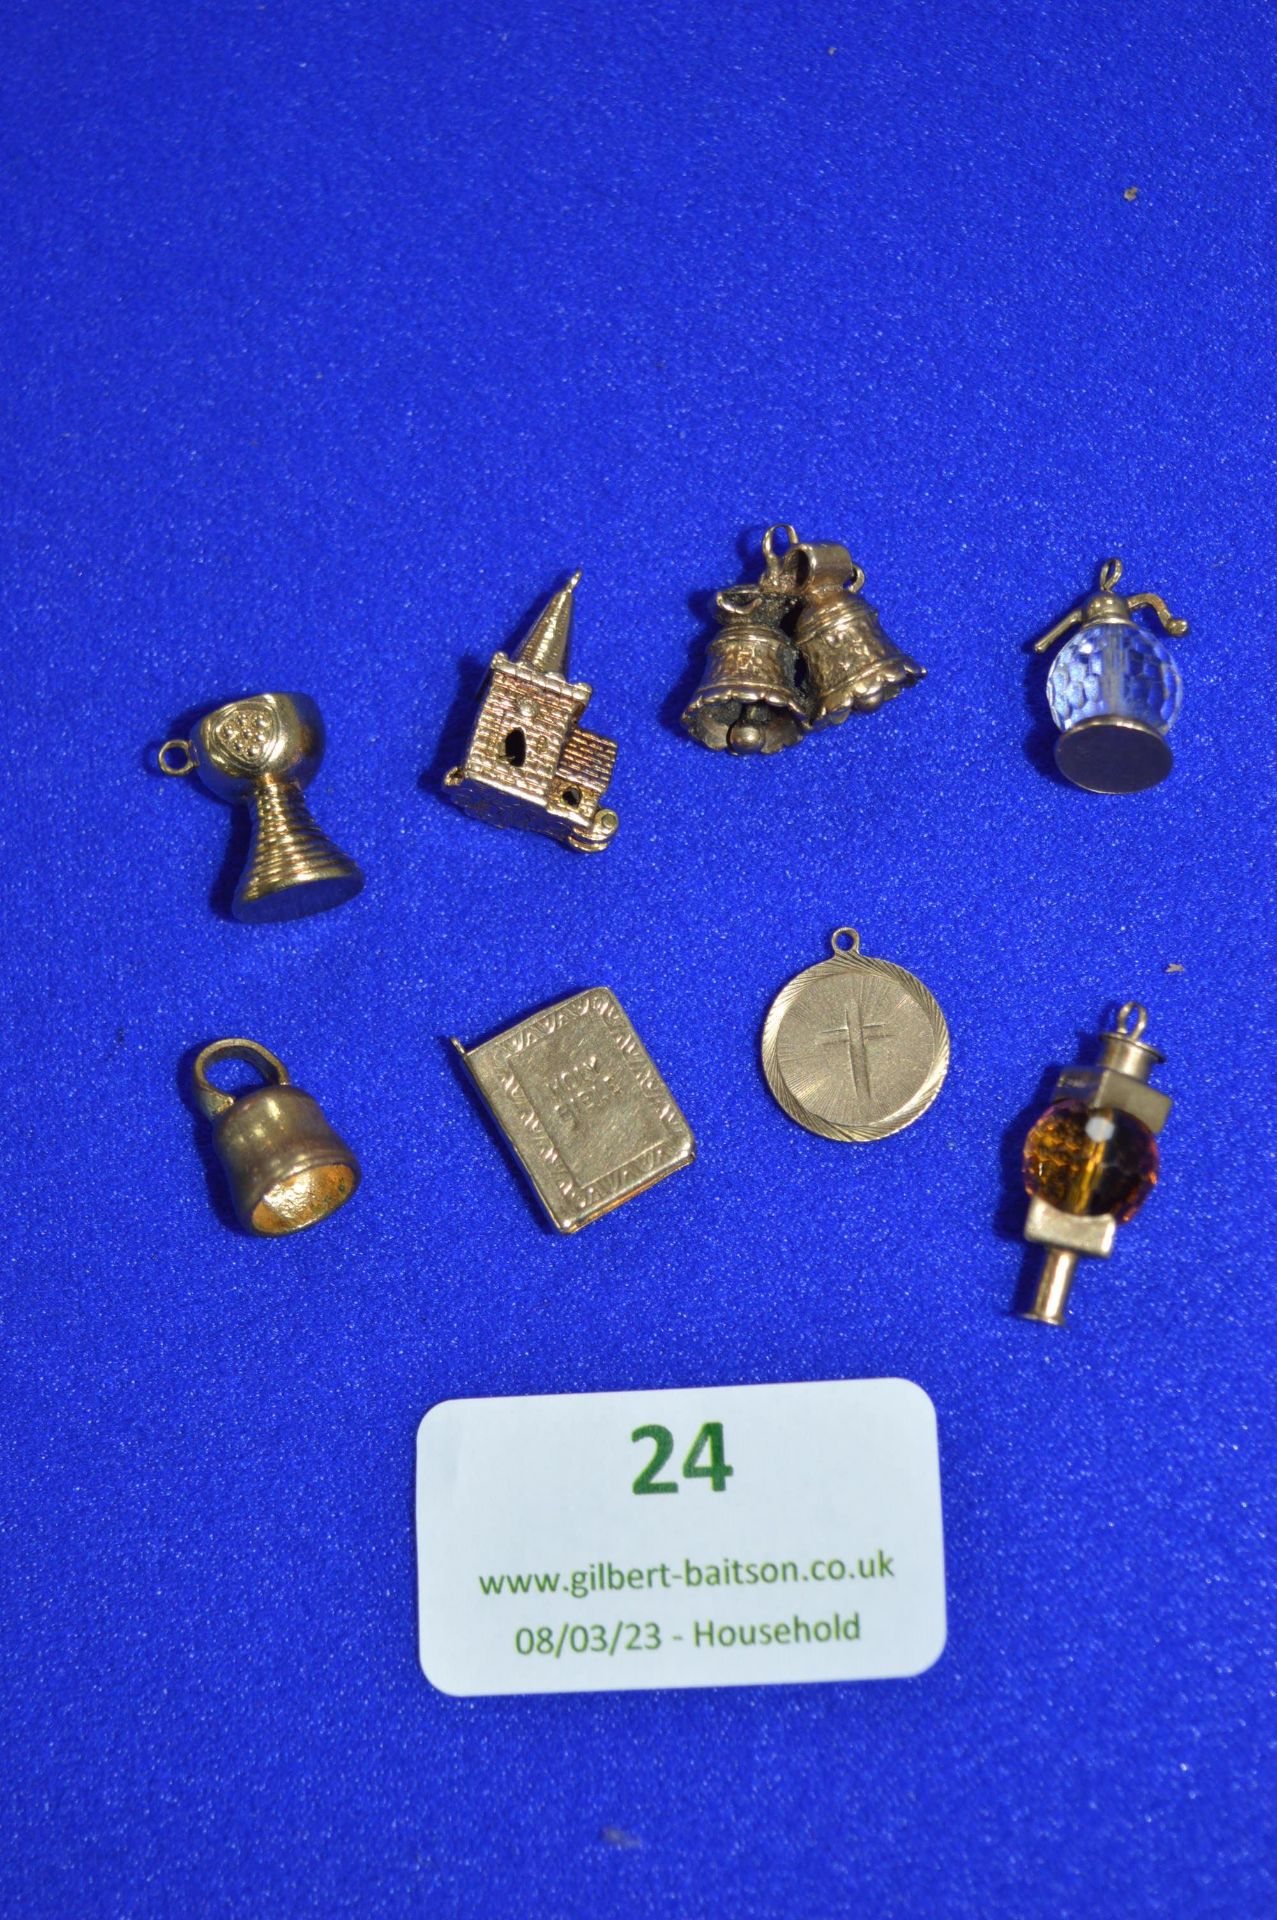 Six 9k Gold Charms ~15.2g total, plus Two Non-Gold Charms